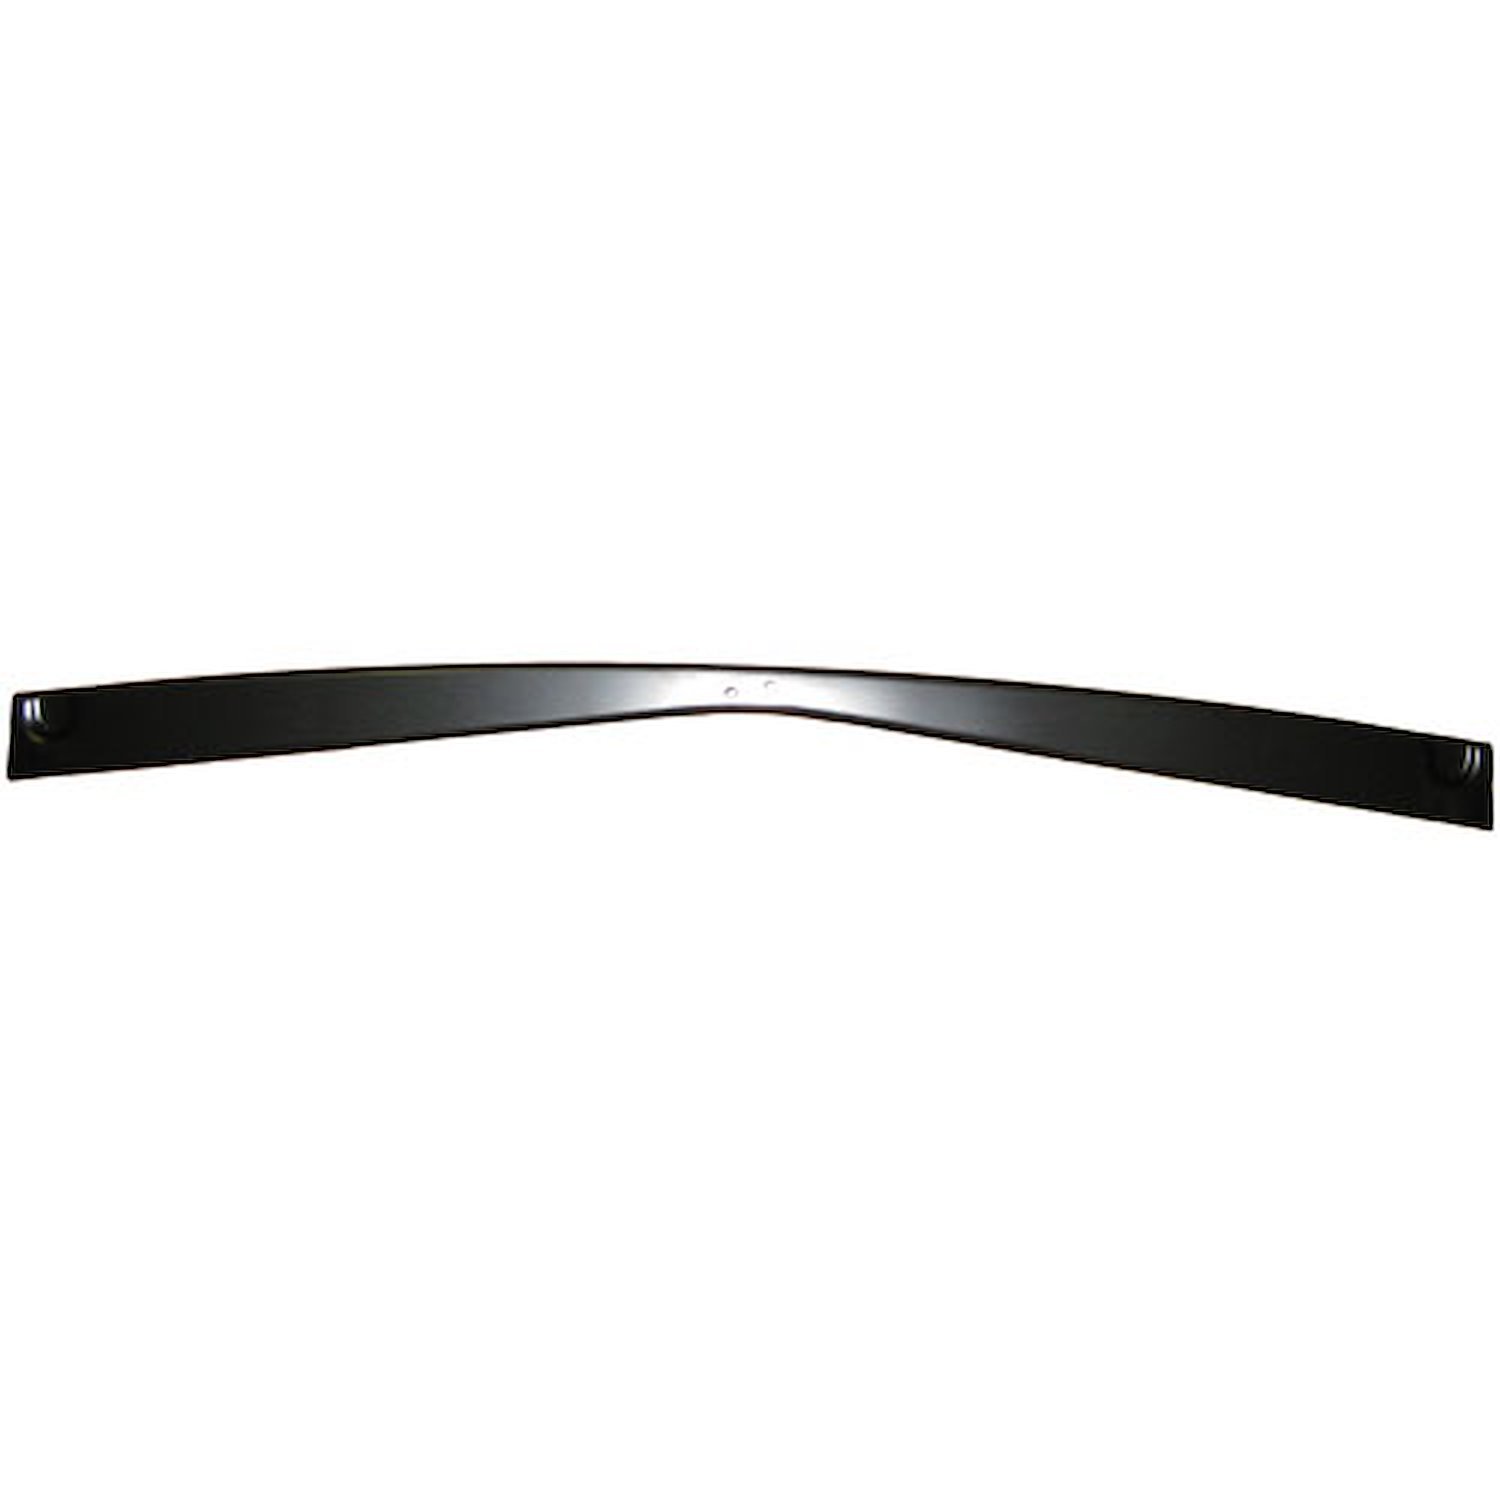 GR13-57SB Grille Support Bar 1957 Chevy Bel Air